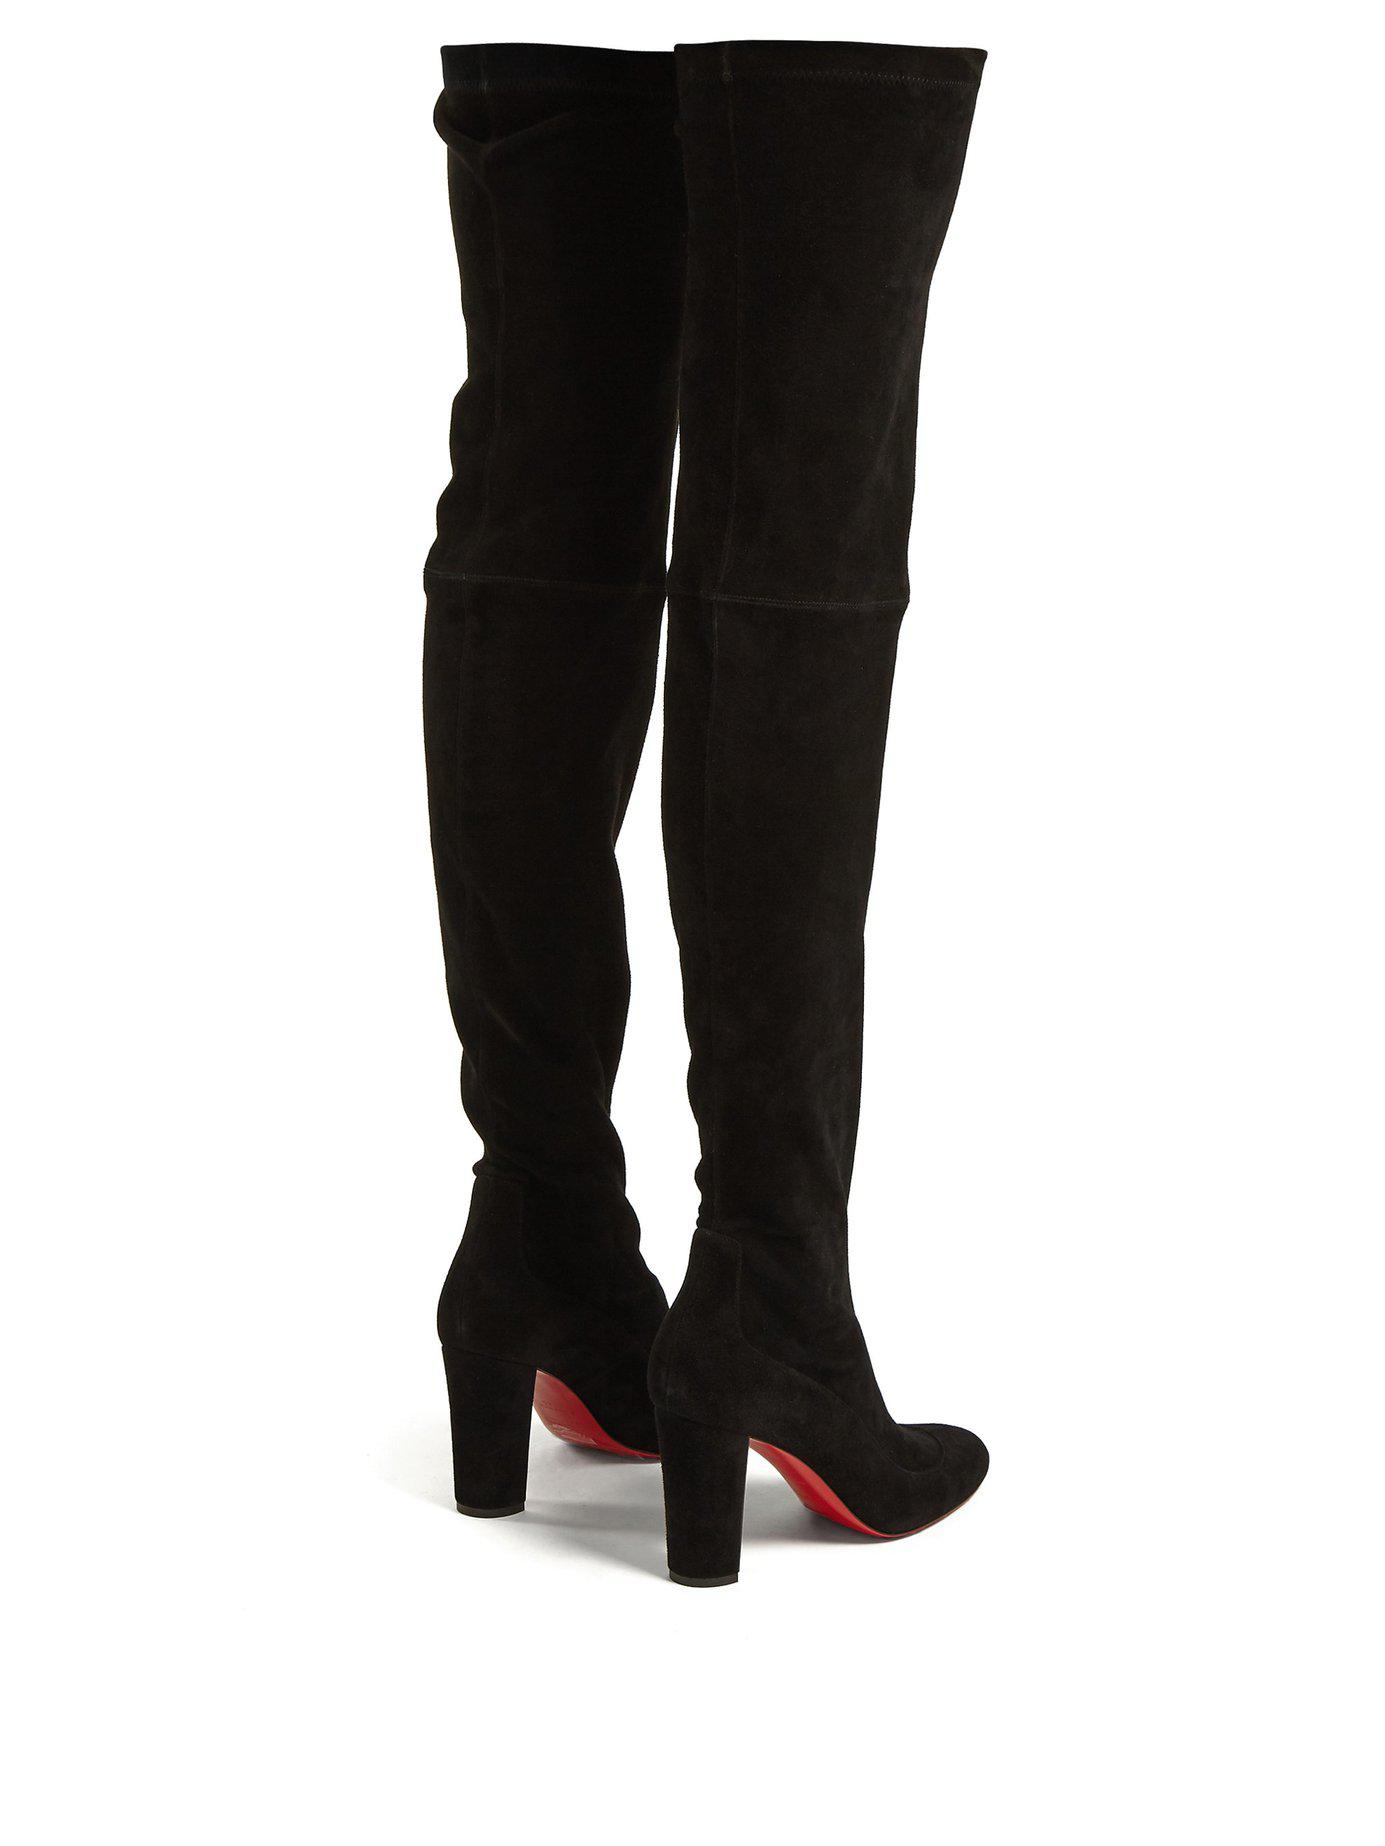 Christian Kiss Me Gina 85 Over The Knee Boots in Black | Lyst